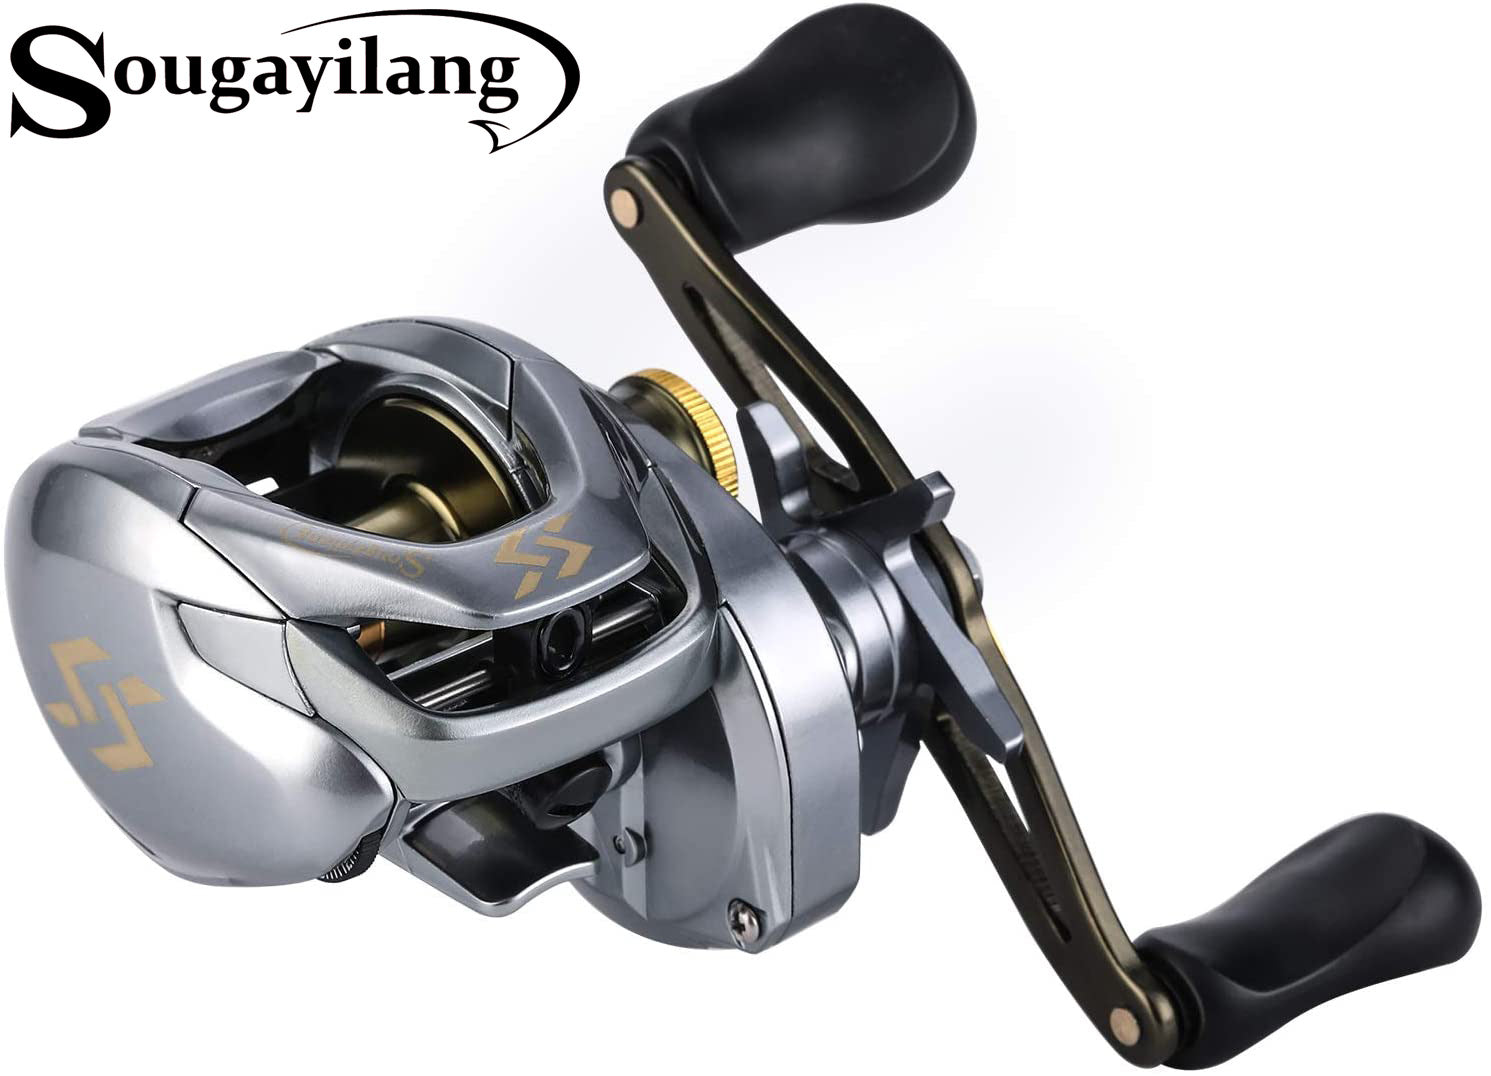 Sougayilang Baitcasting Reel,7.0:1 Gear Ratio Super Smooth Power, 9 + 1 Shielded Ball Bearings Anti-Corrosion Fishing Reel(Right), Other